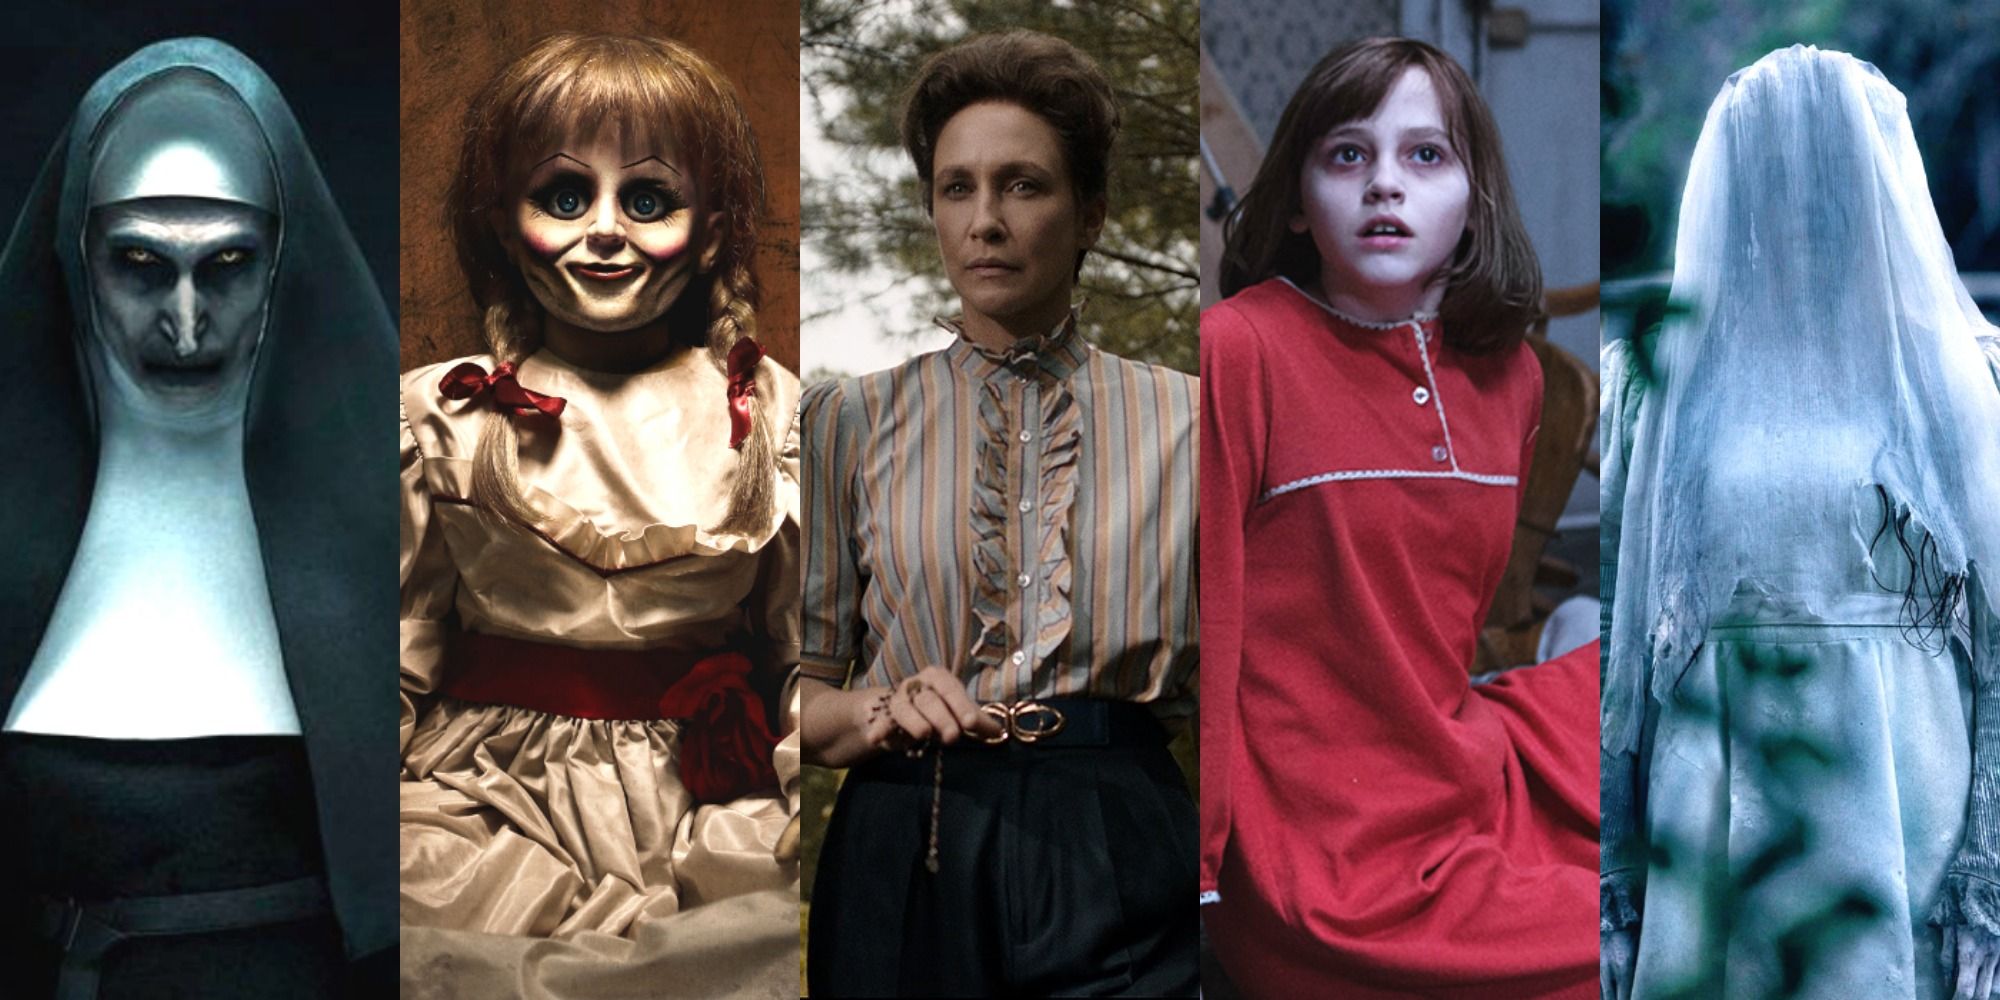 A split screen of images from the Conjuring franchise.